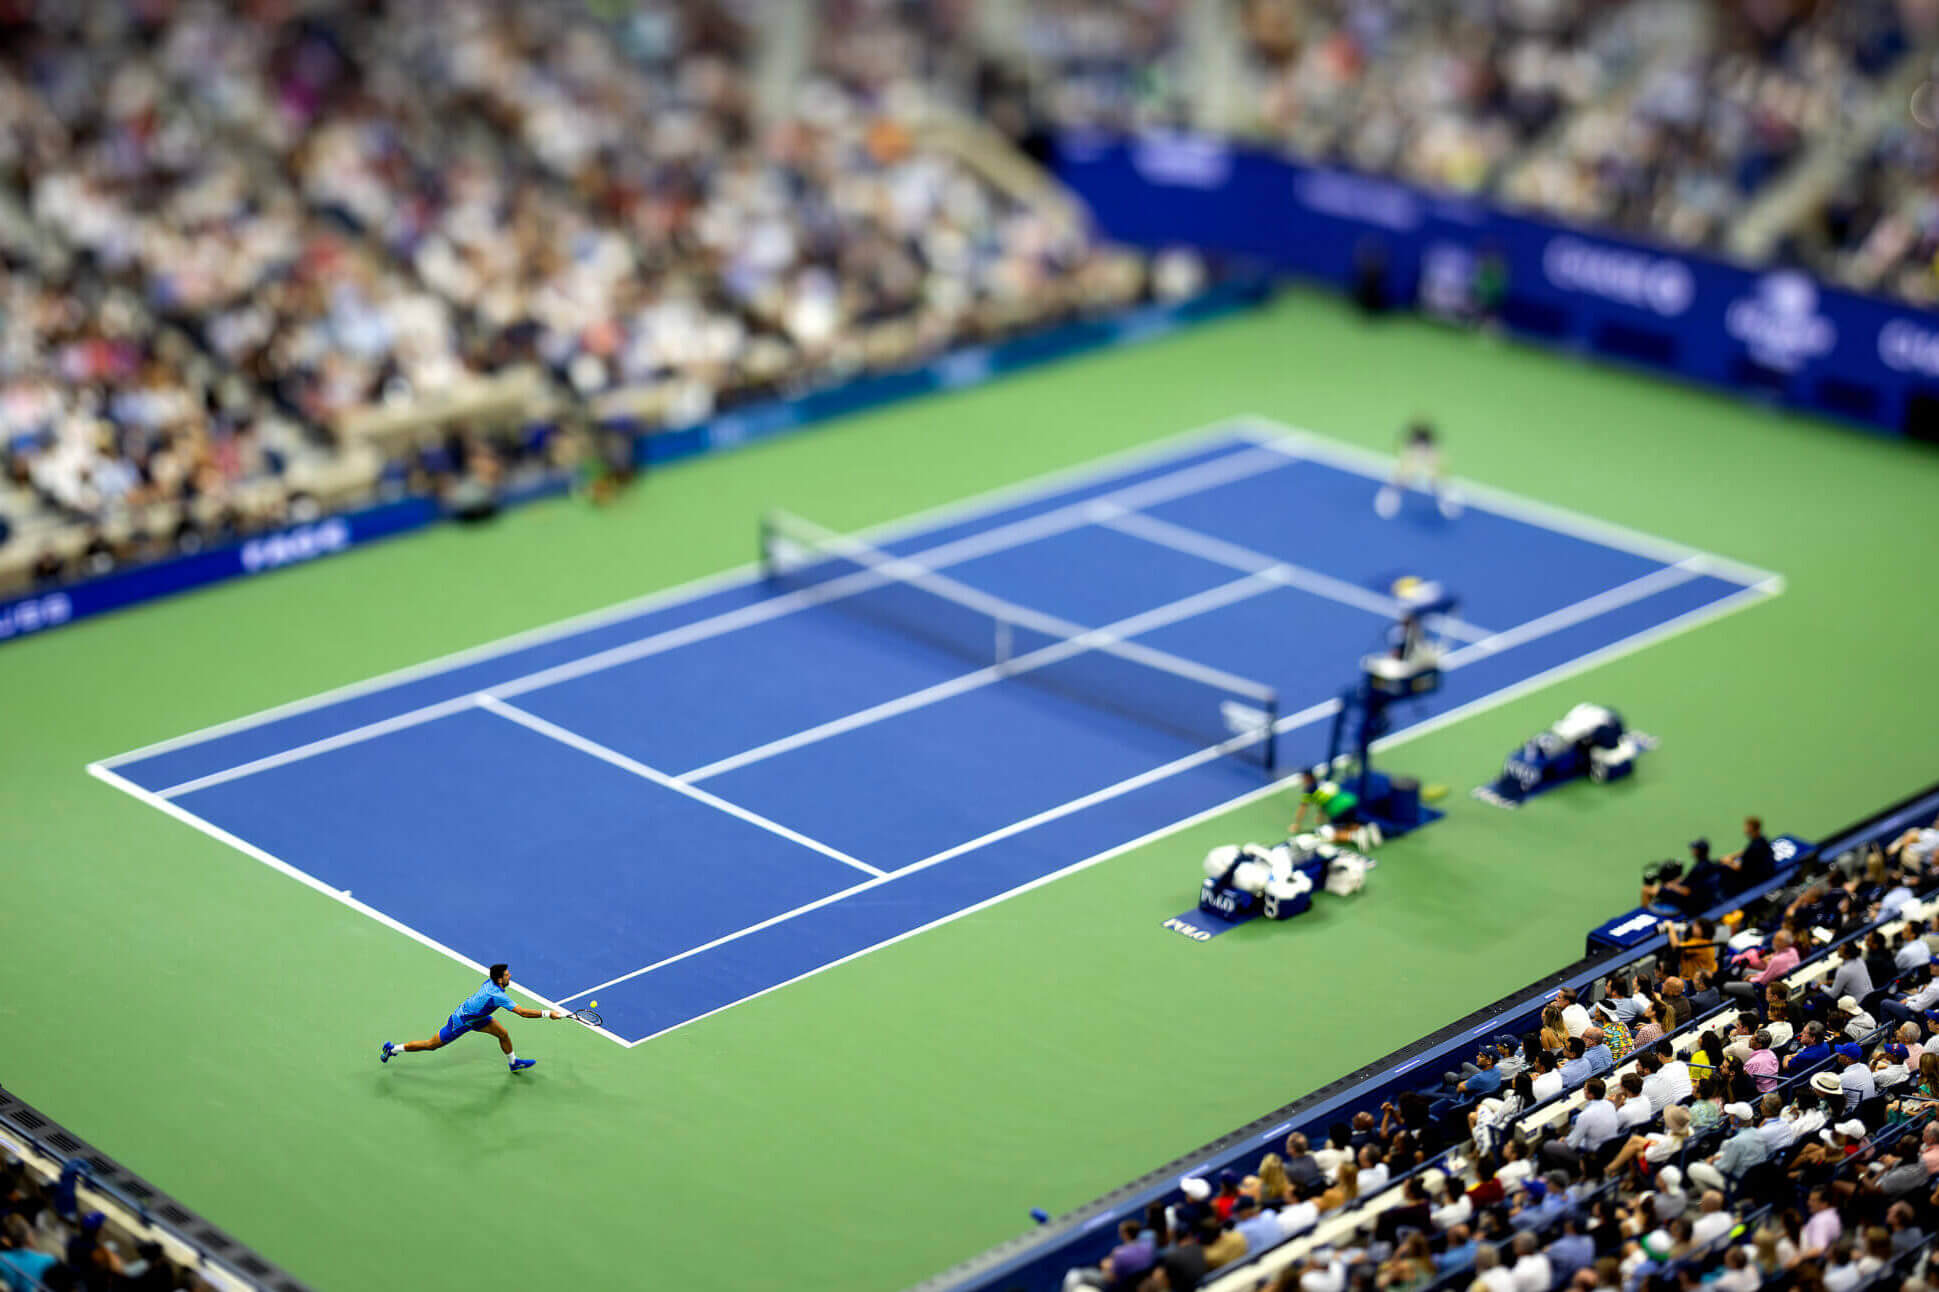 US Open men's singles final to be shown on ABC for first time